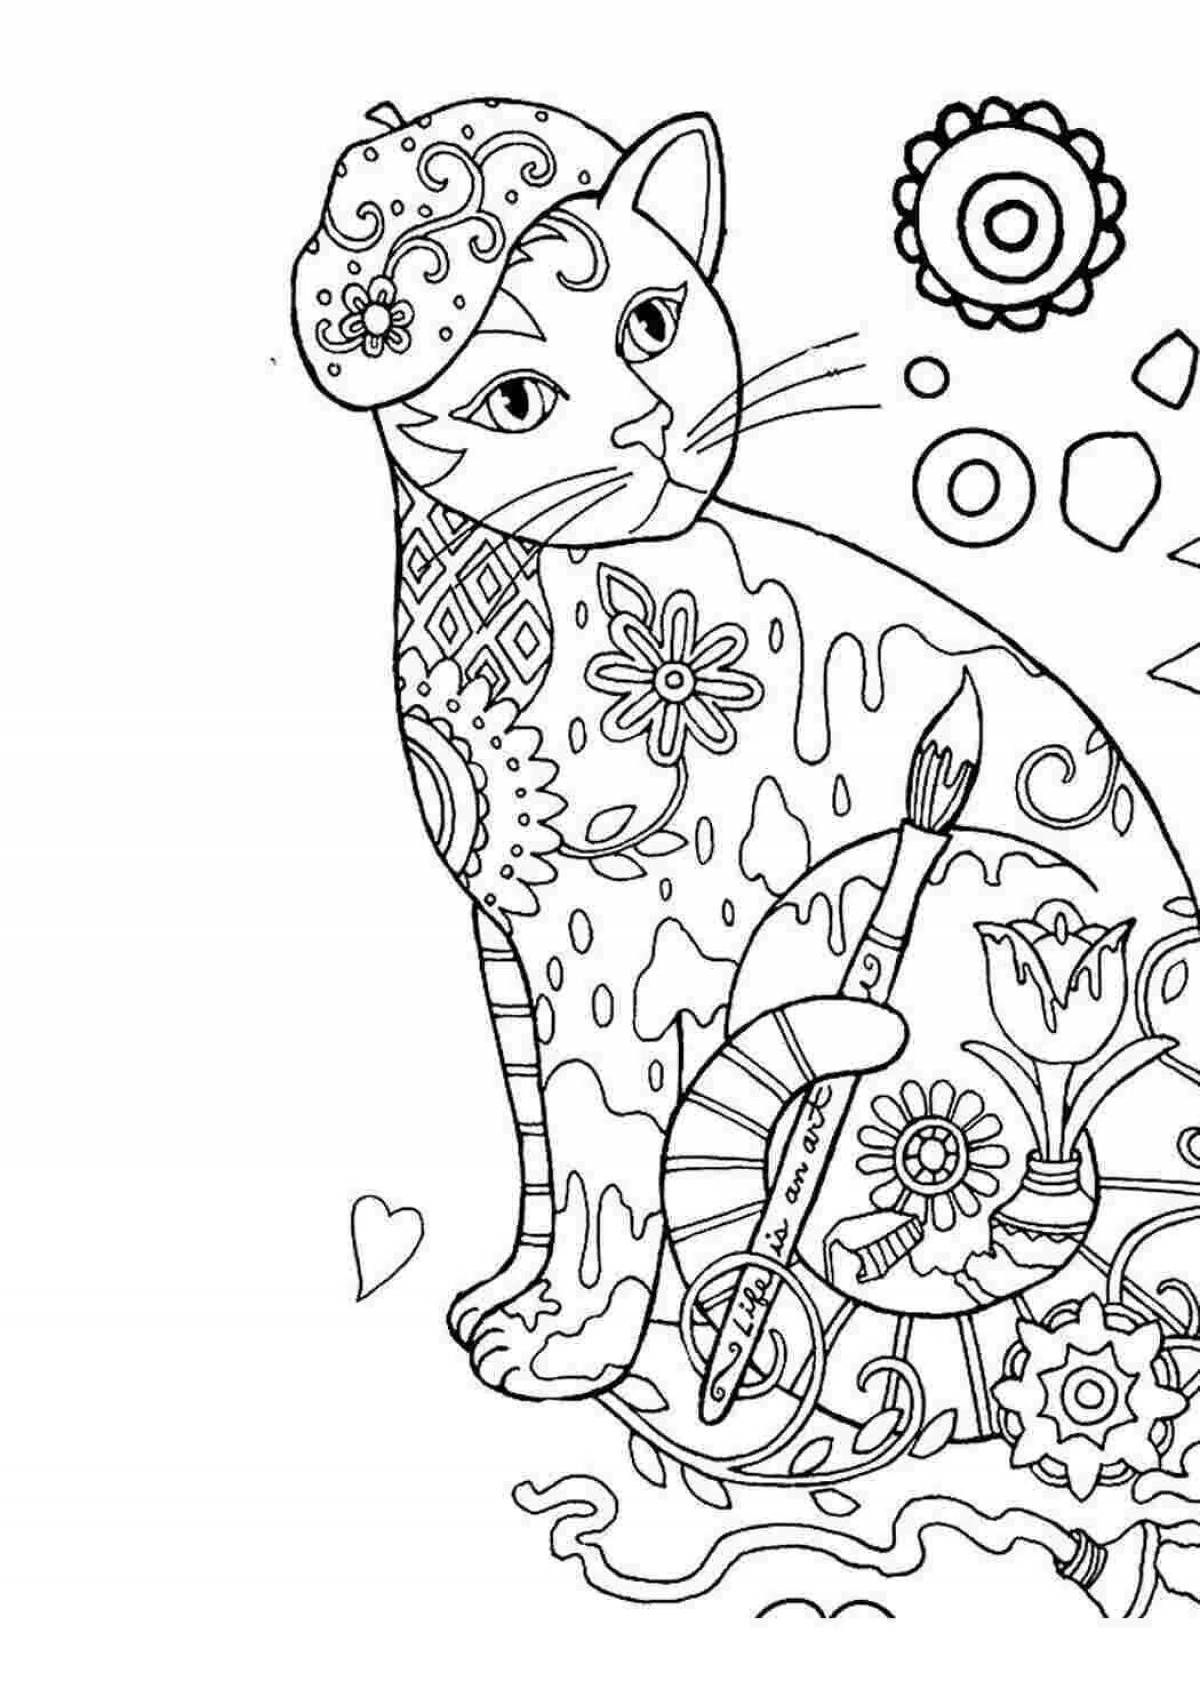 Kitty stylish coloring by numbers